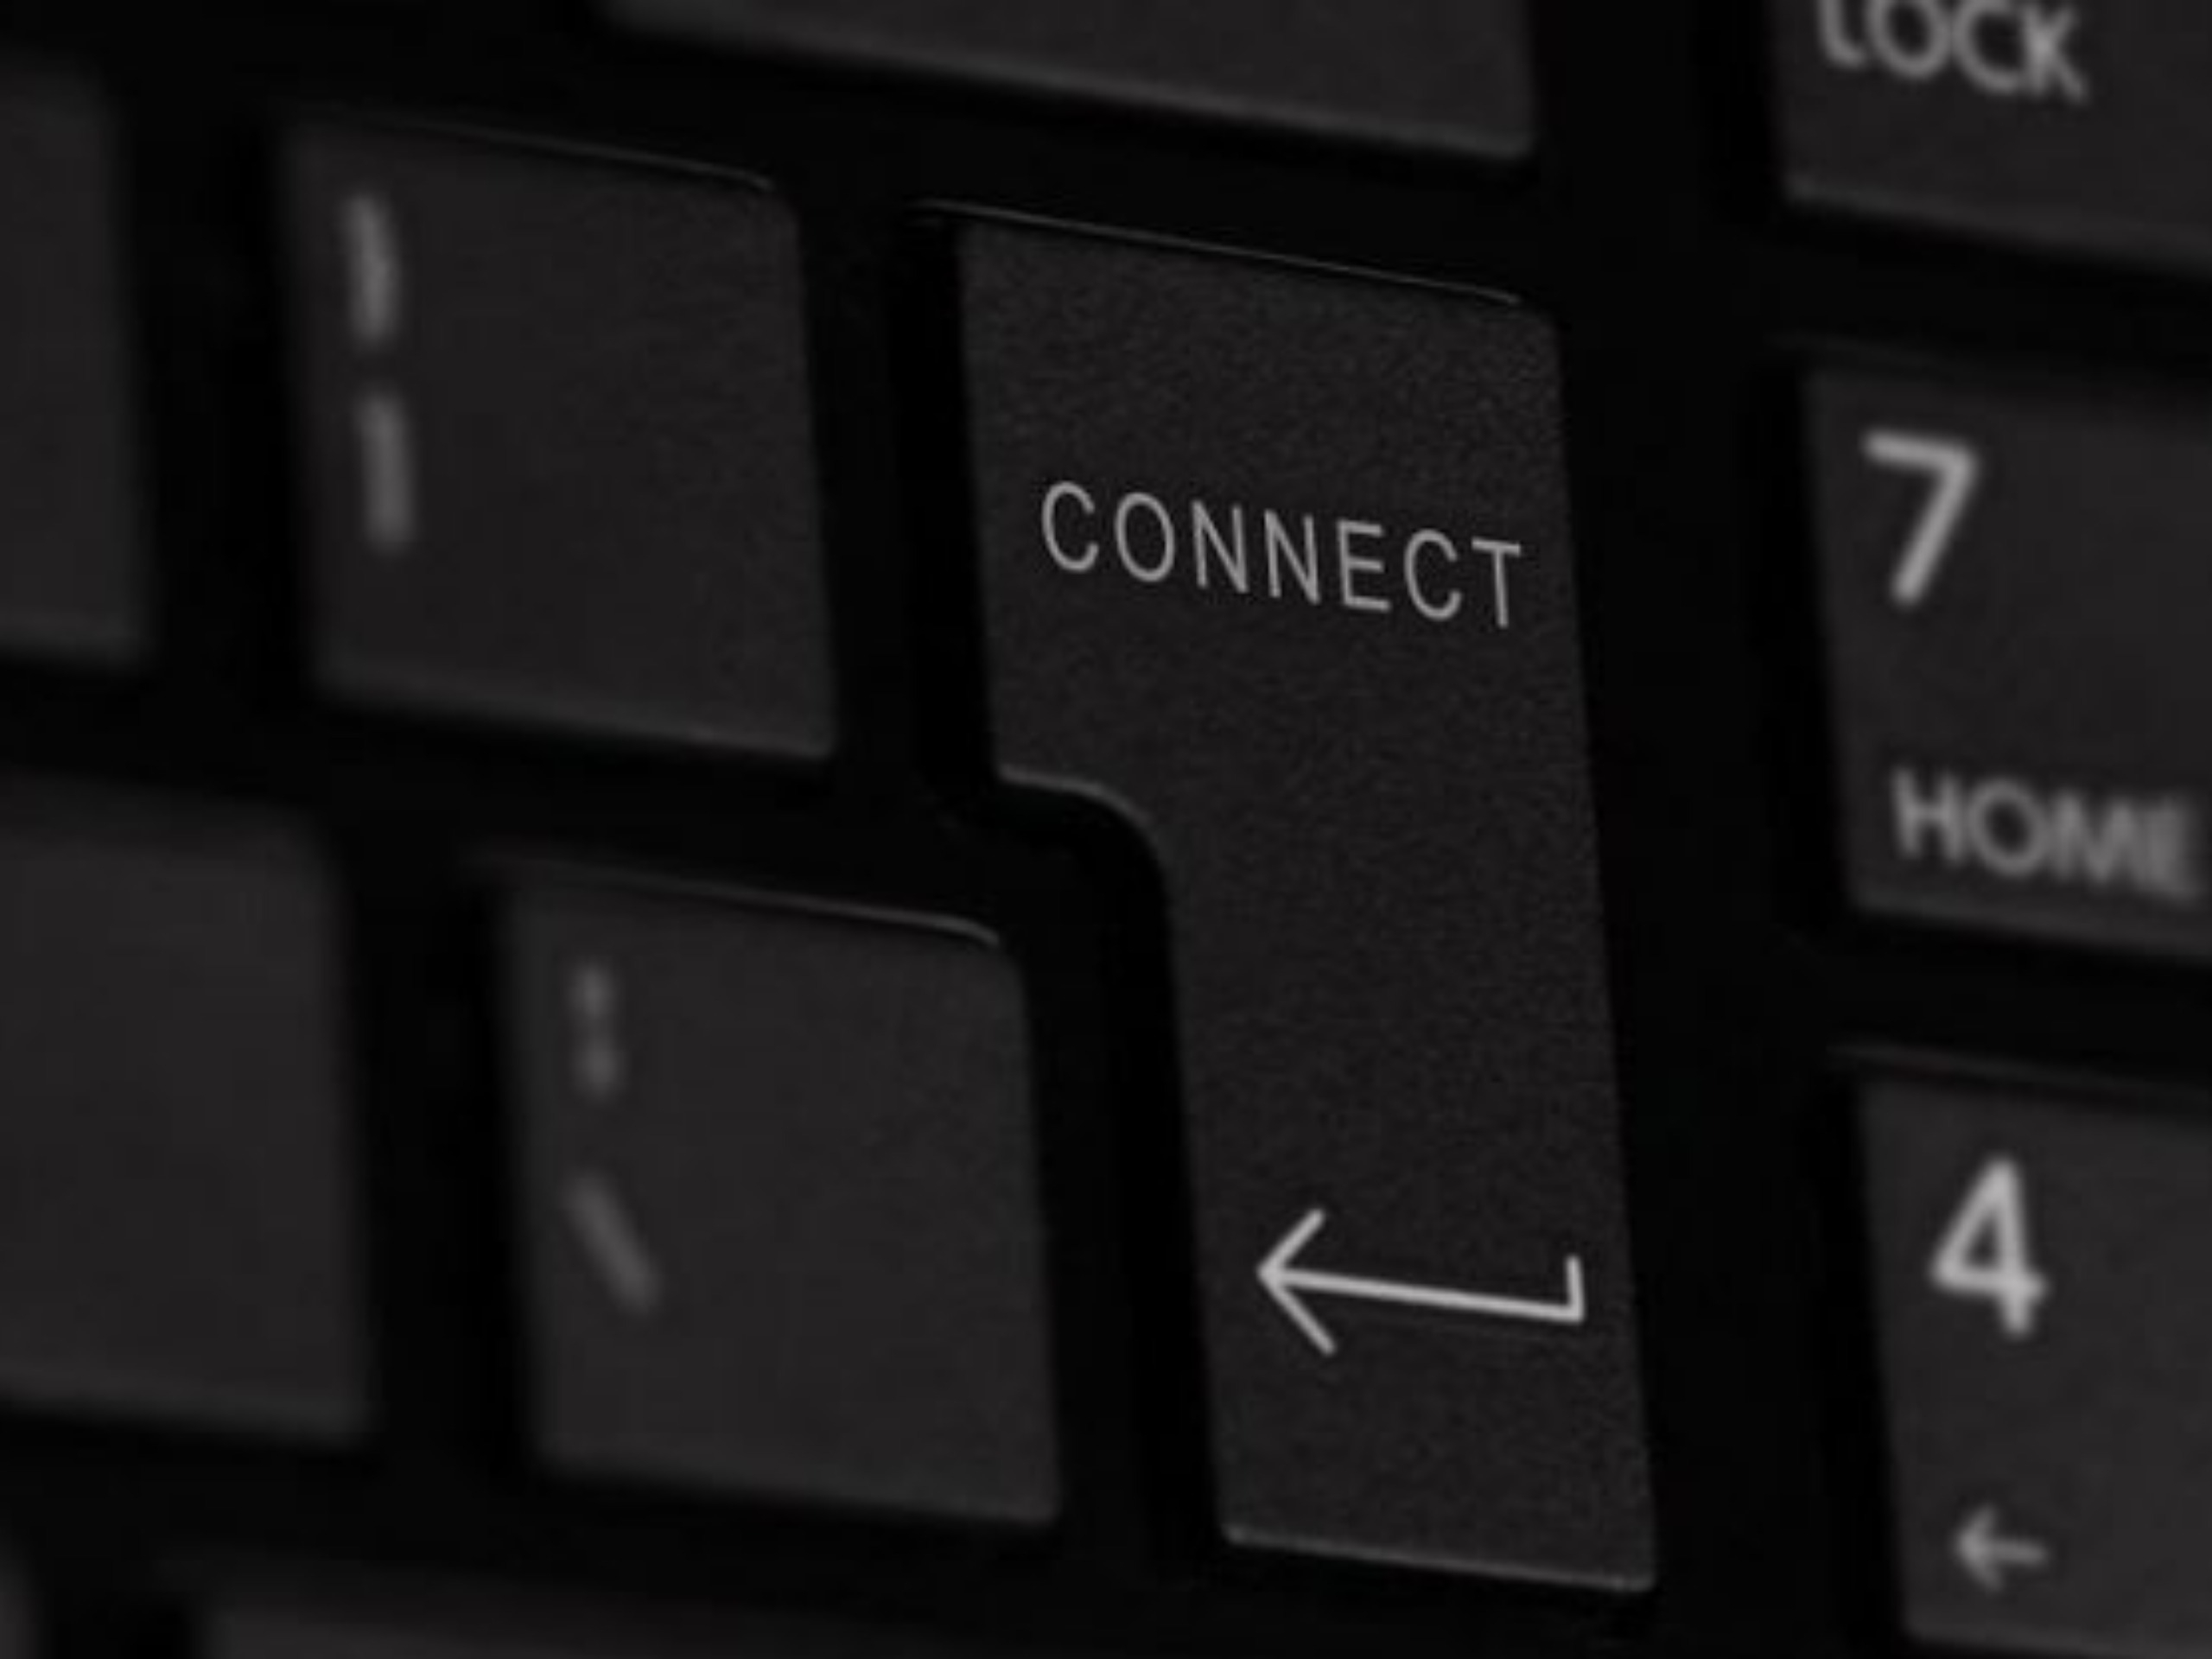 close up of enter key on a keyboard showing the word 'connect' and arrow